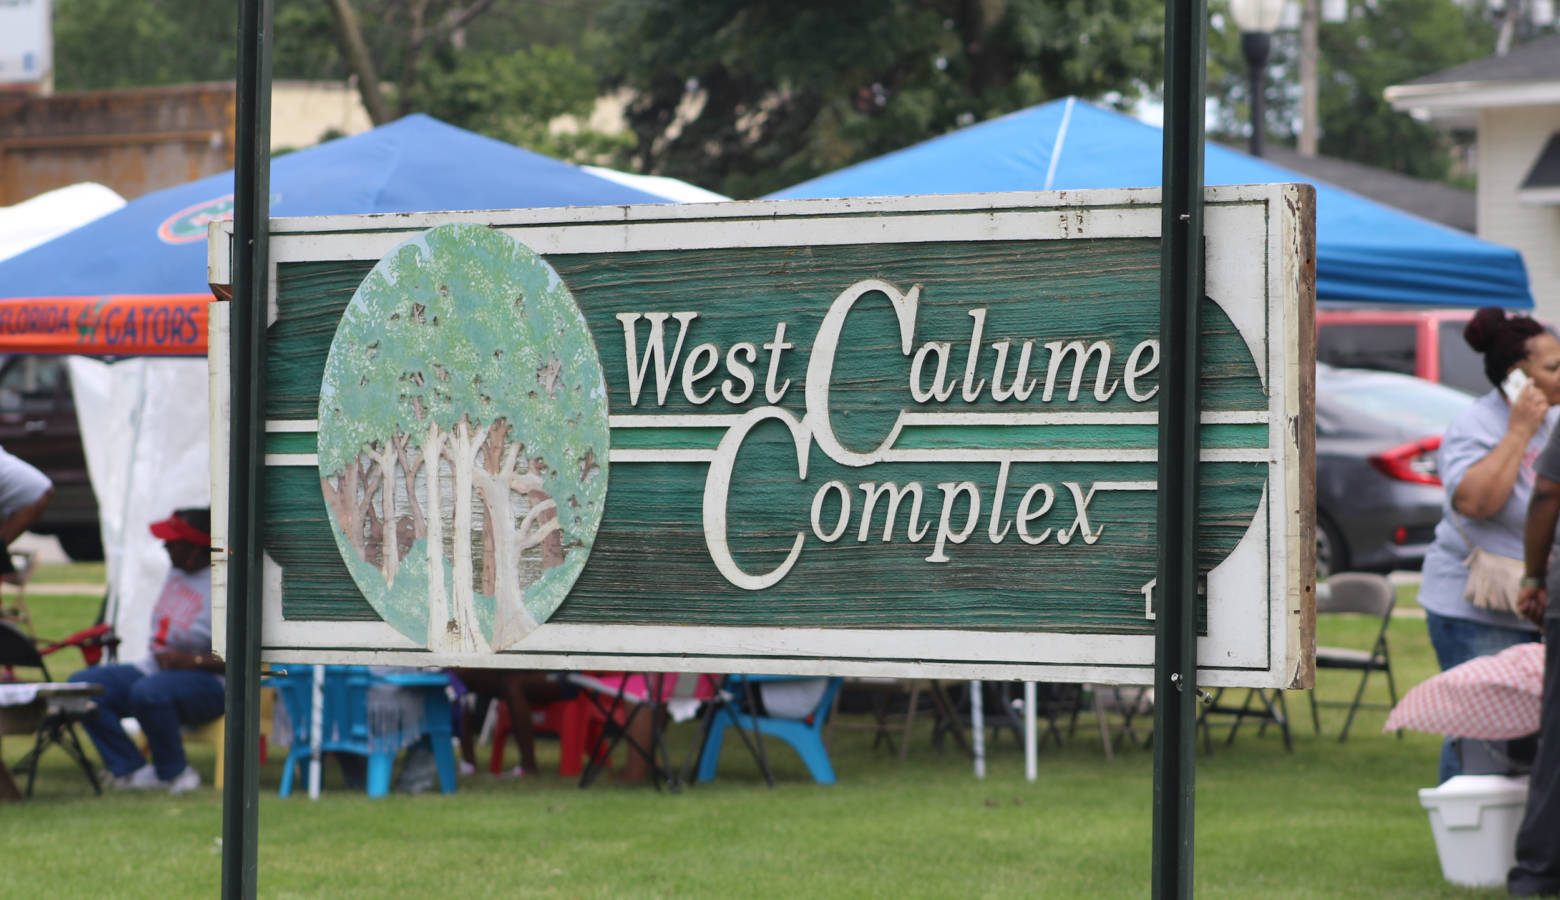 The closure of the West Calumet Housing Complex, its old sign seen here at a local block party in July, left a big hole in East Chicago's affordable housing stock that state officials now hope to help fill. (Annie Ropeik/IPB file photo)